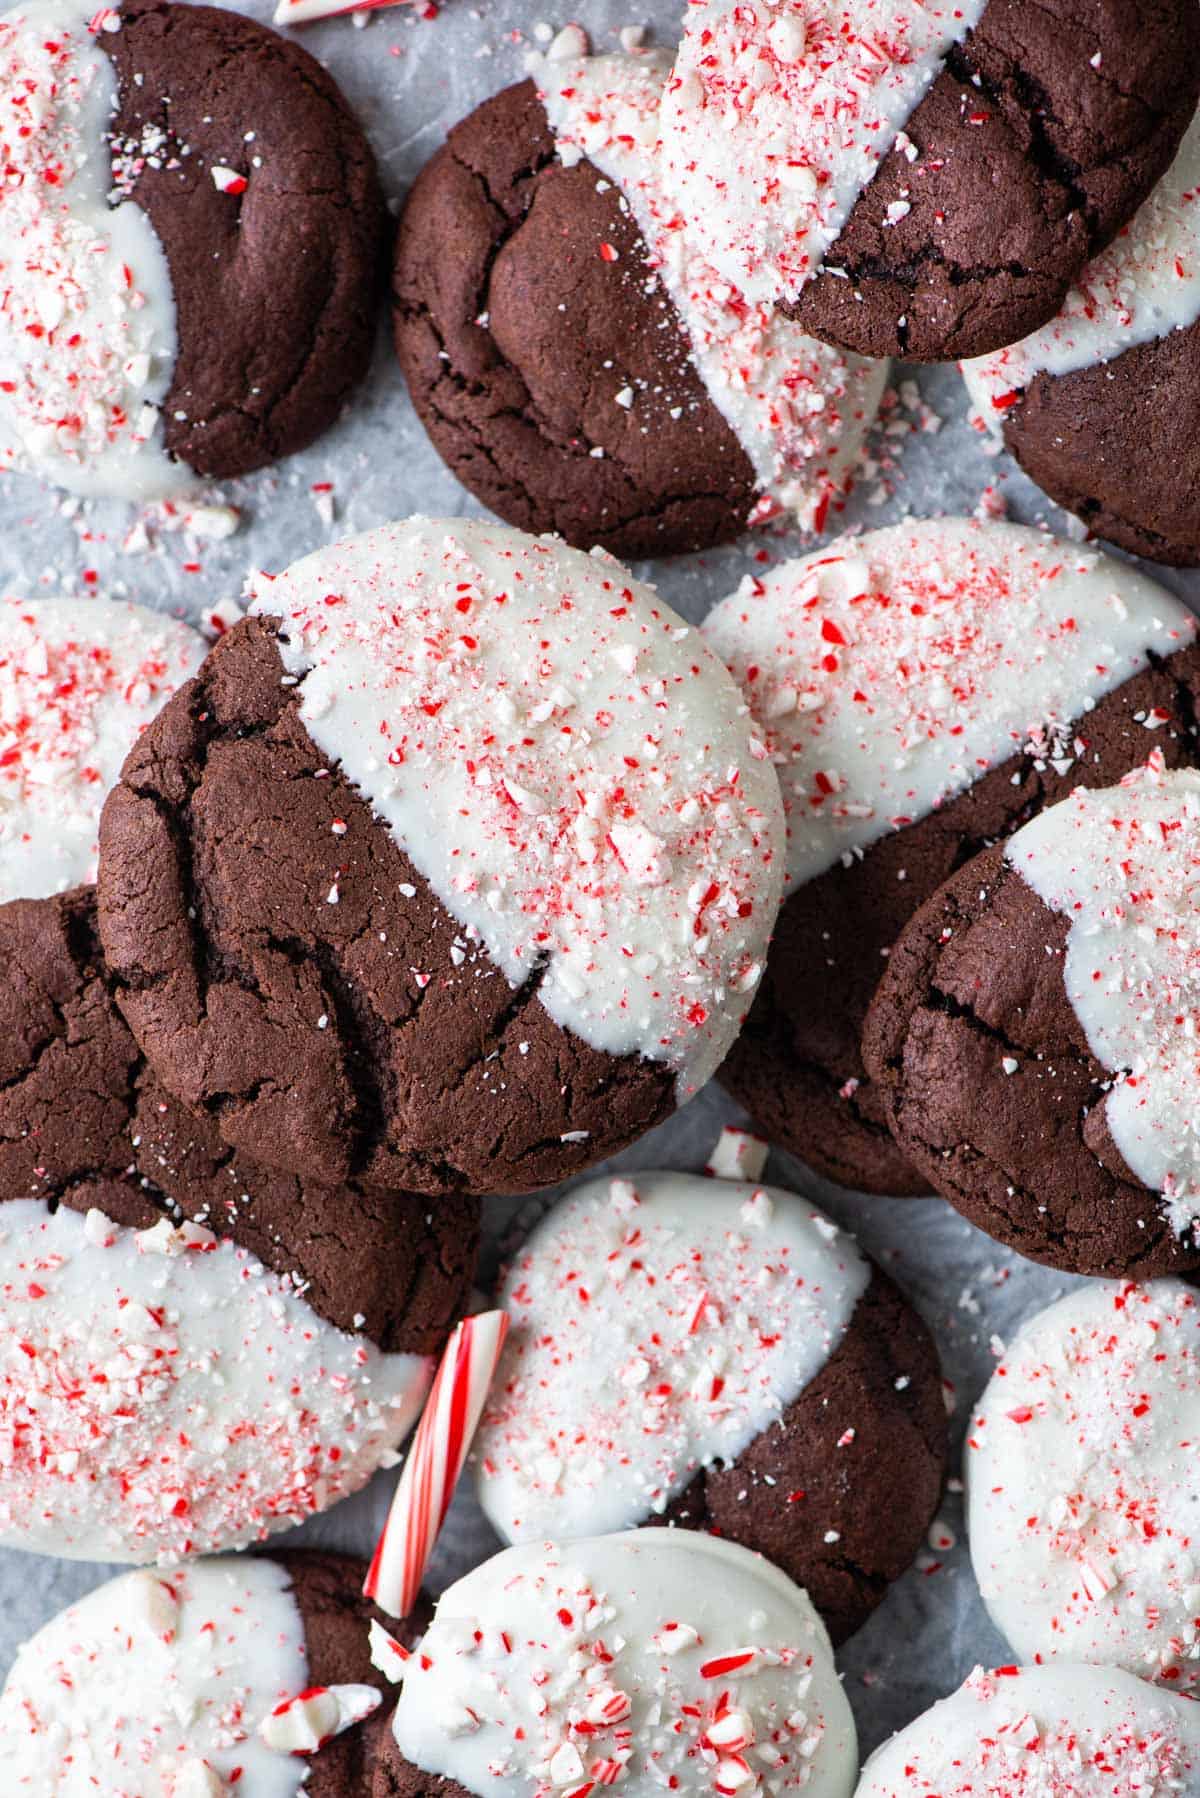 Overhead view of chocolate candy cane cookies